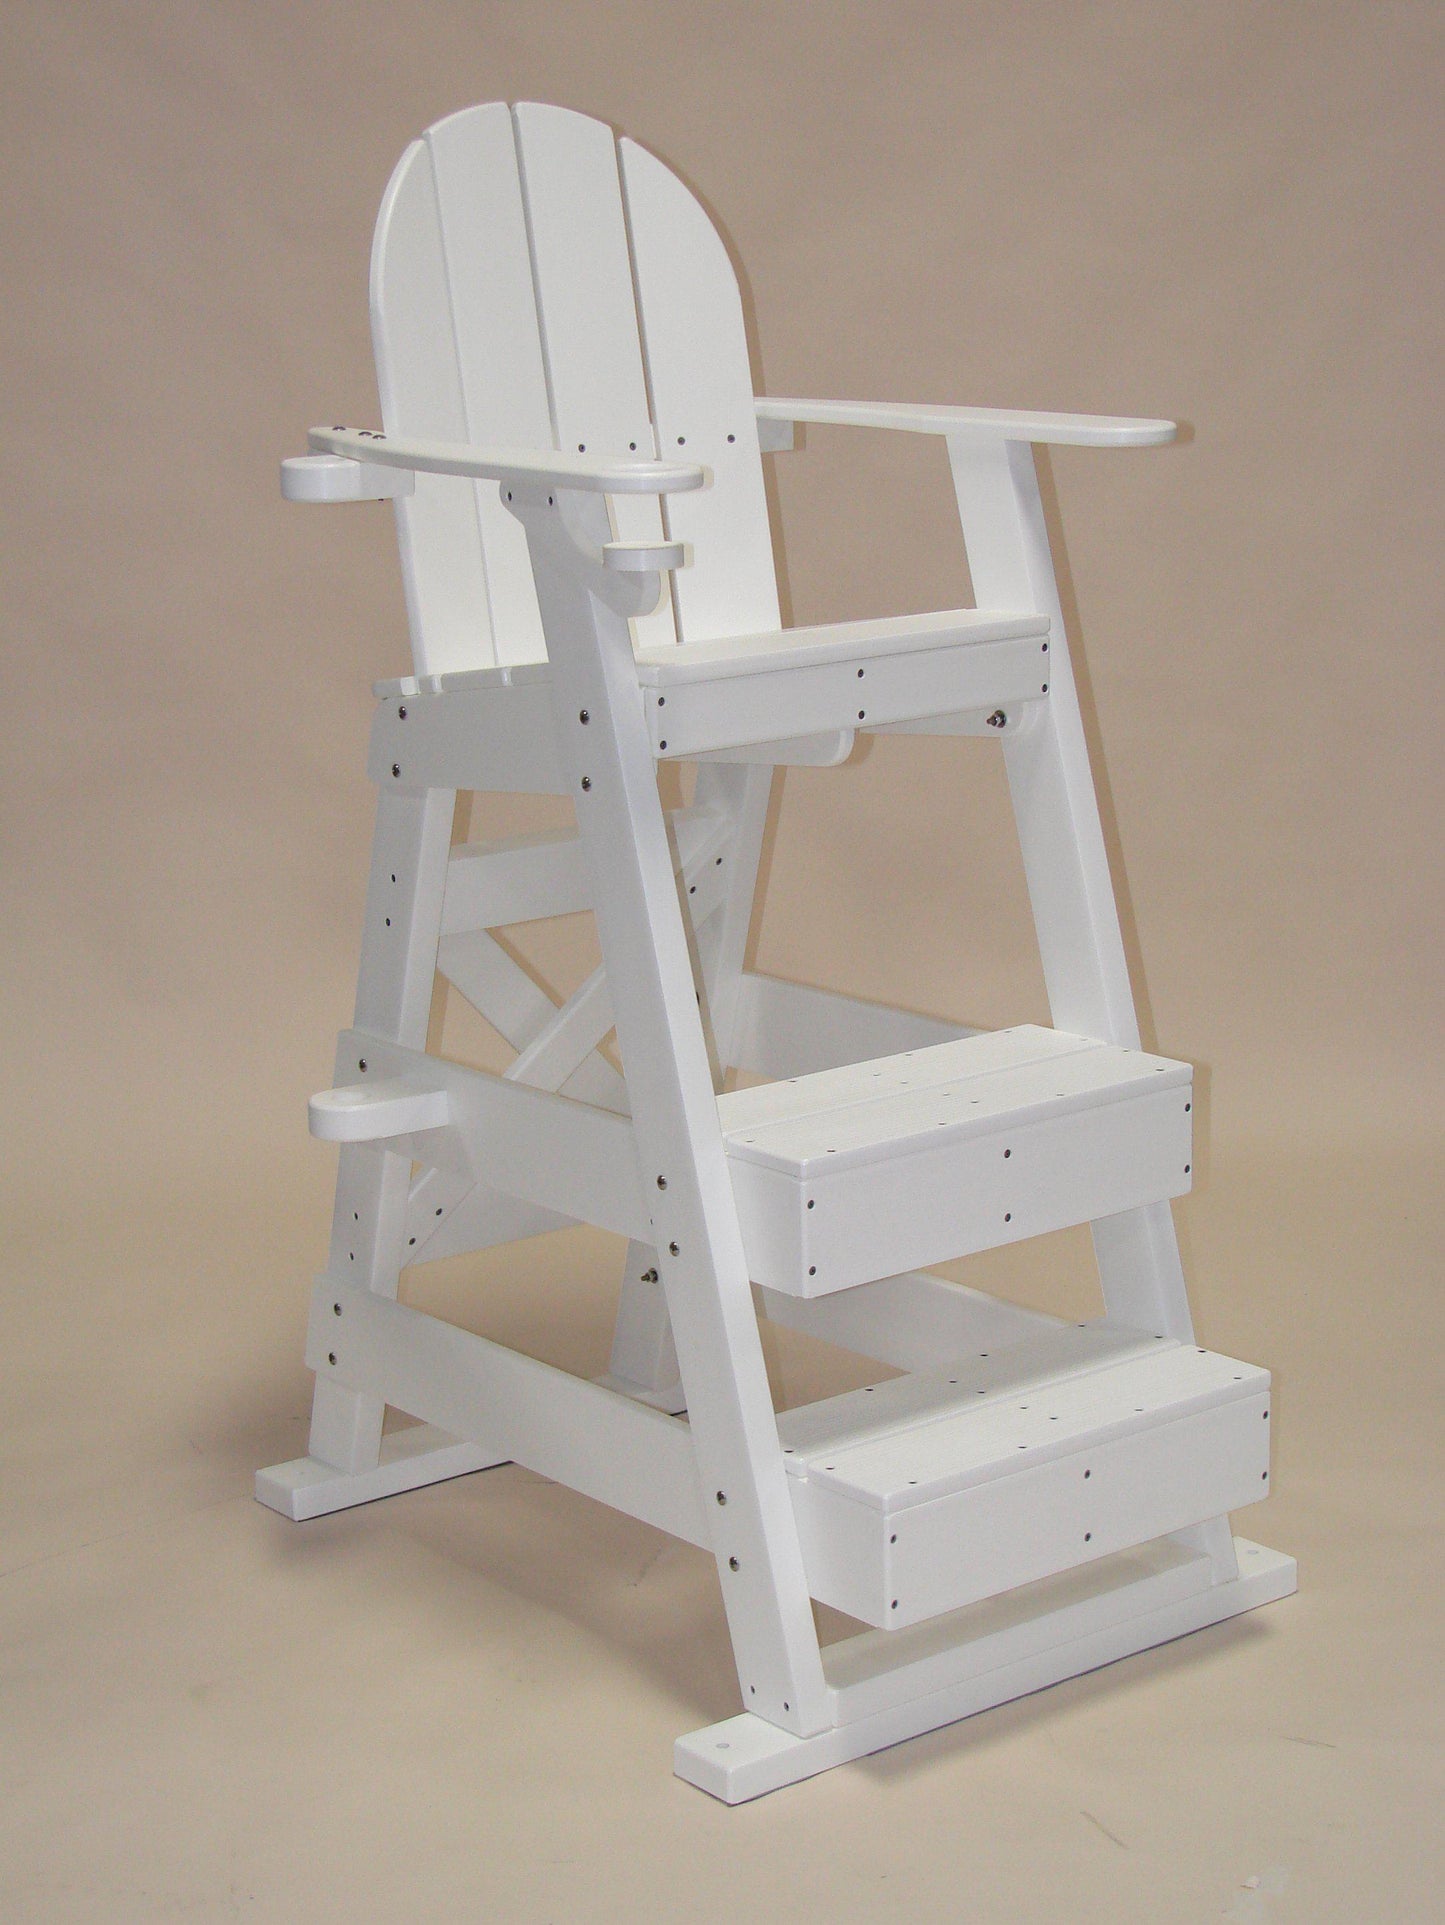 Tailwind Furniture Recycled Plastic Lifeguard Chair - LG-510 - Seat Height: 40" - LEAD TIME TO SHIP 10 TO 12 BUSINESS DAYS